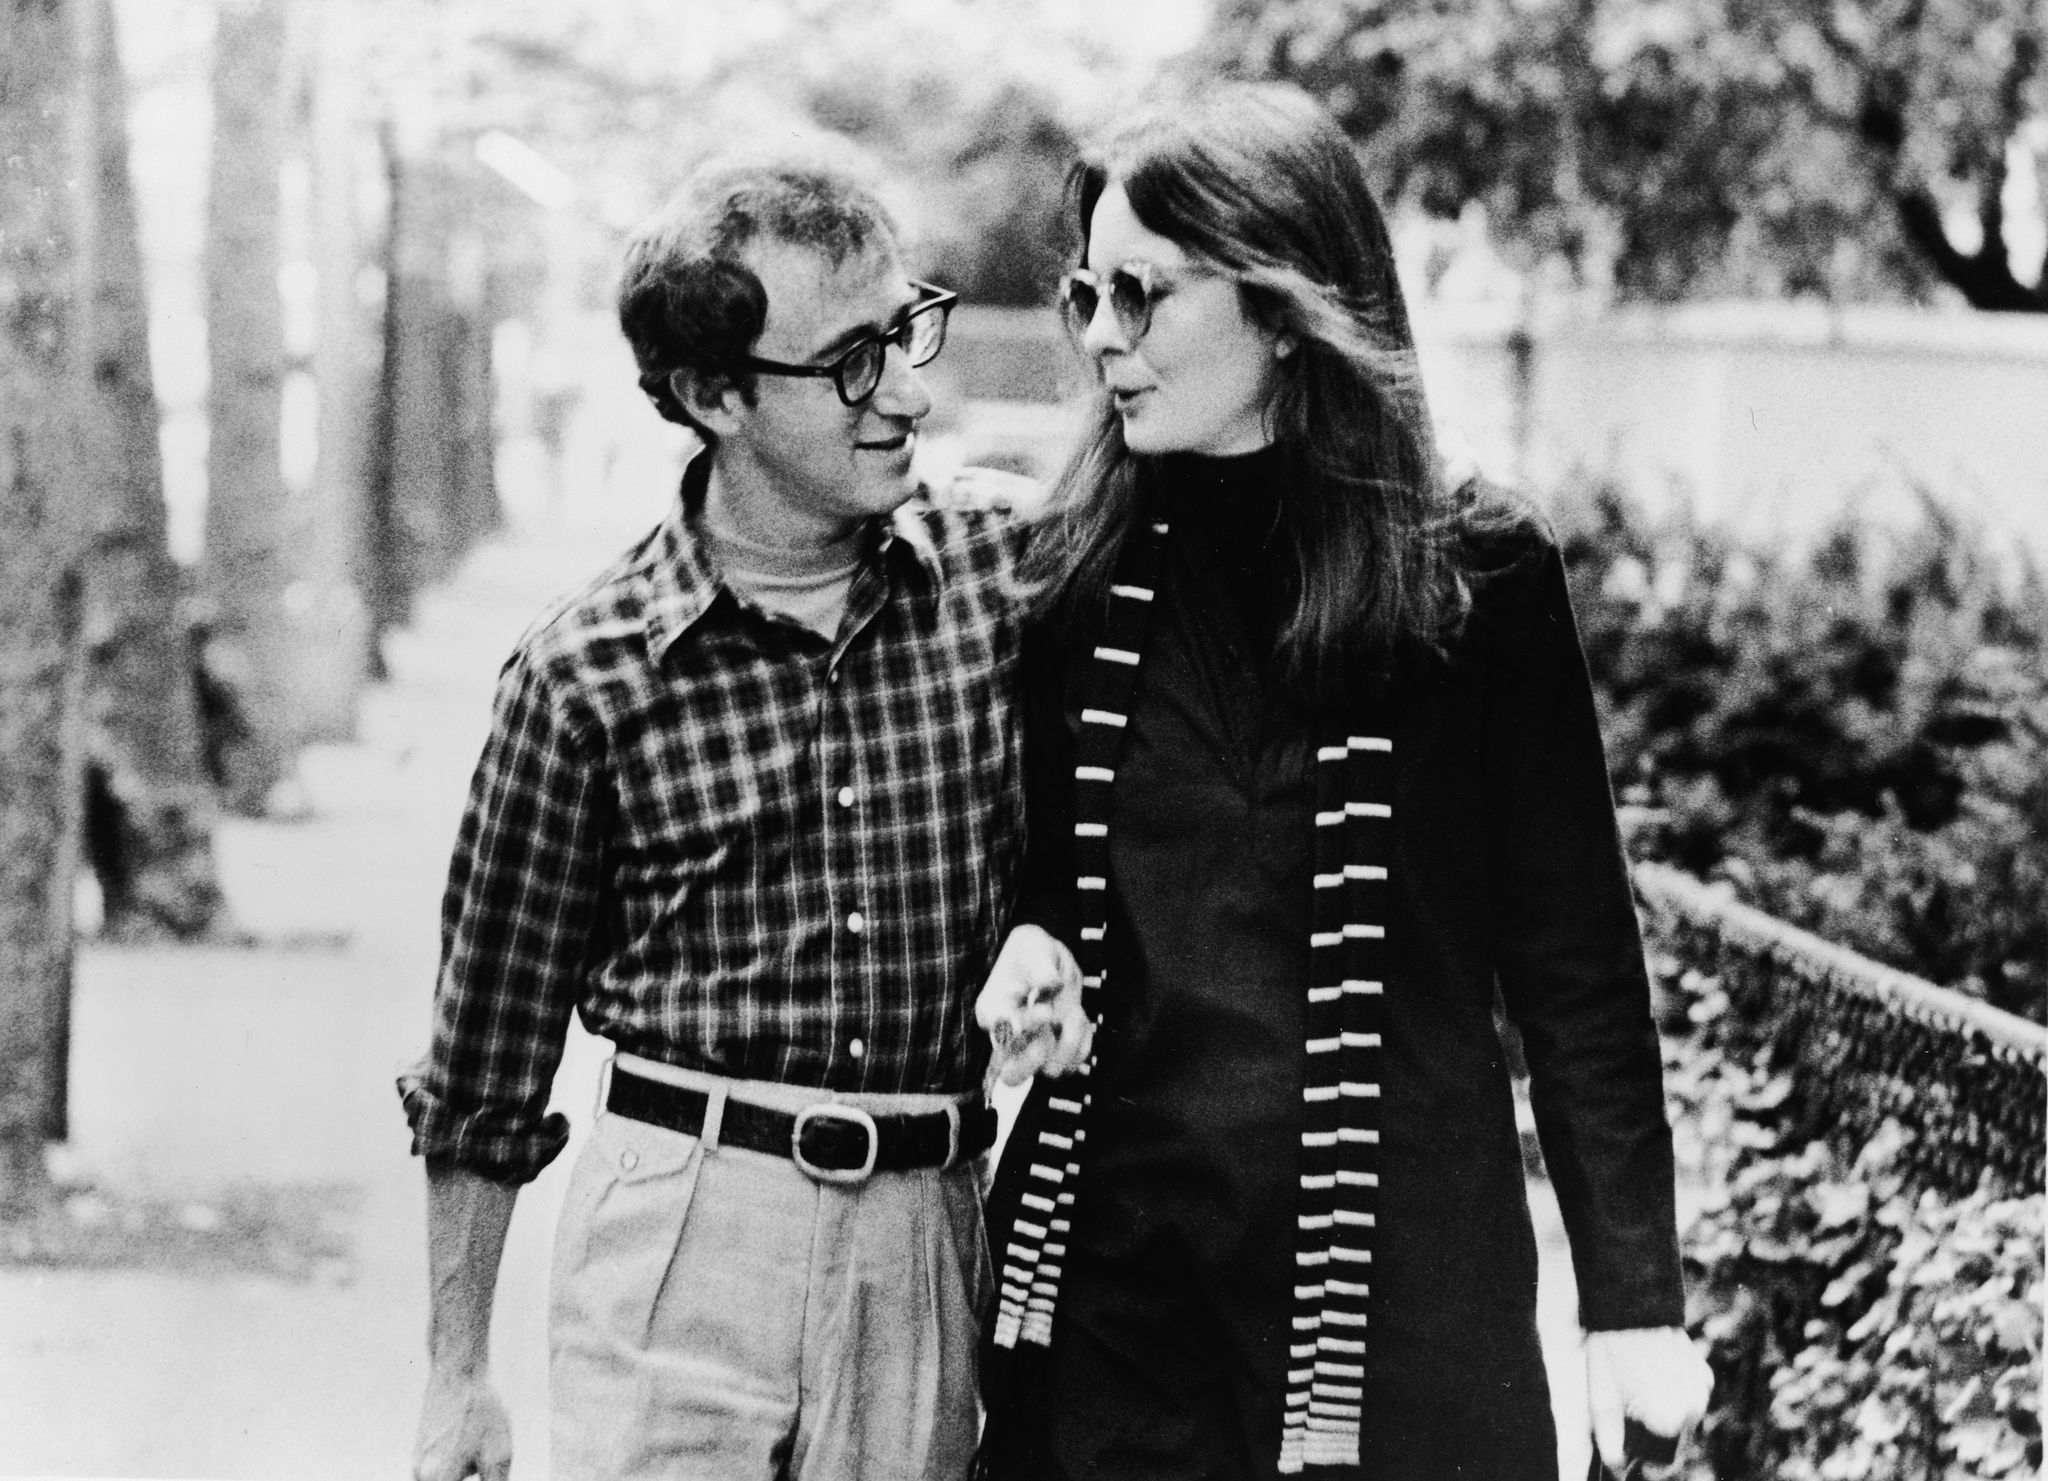 american actors diane keaton and woody allen walk along a street and talk in a scene from annie hall, directed by allen, new york, new york, 1977 photo by united artistscourtesy of getty images